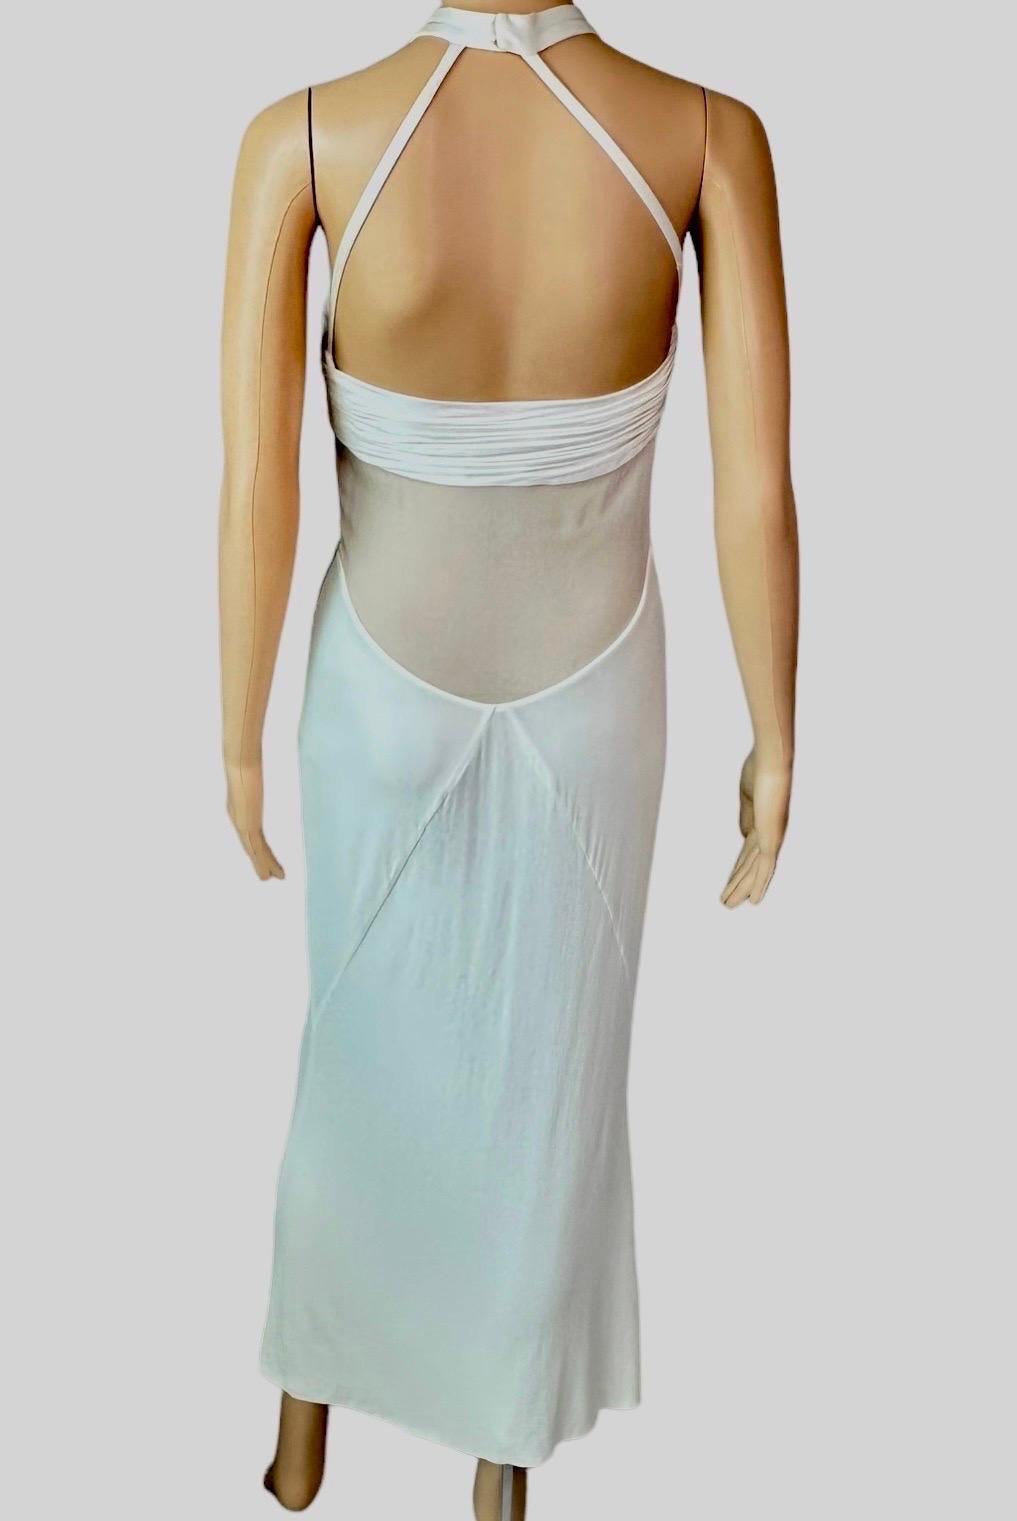 Versace F/W 2006 Halter Cutout Sheer Panels Bodycon Ivory Evening Dress Gown For Sale 3